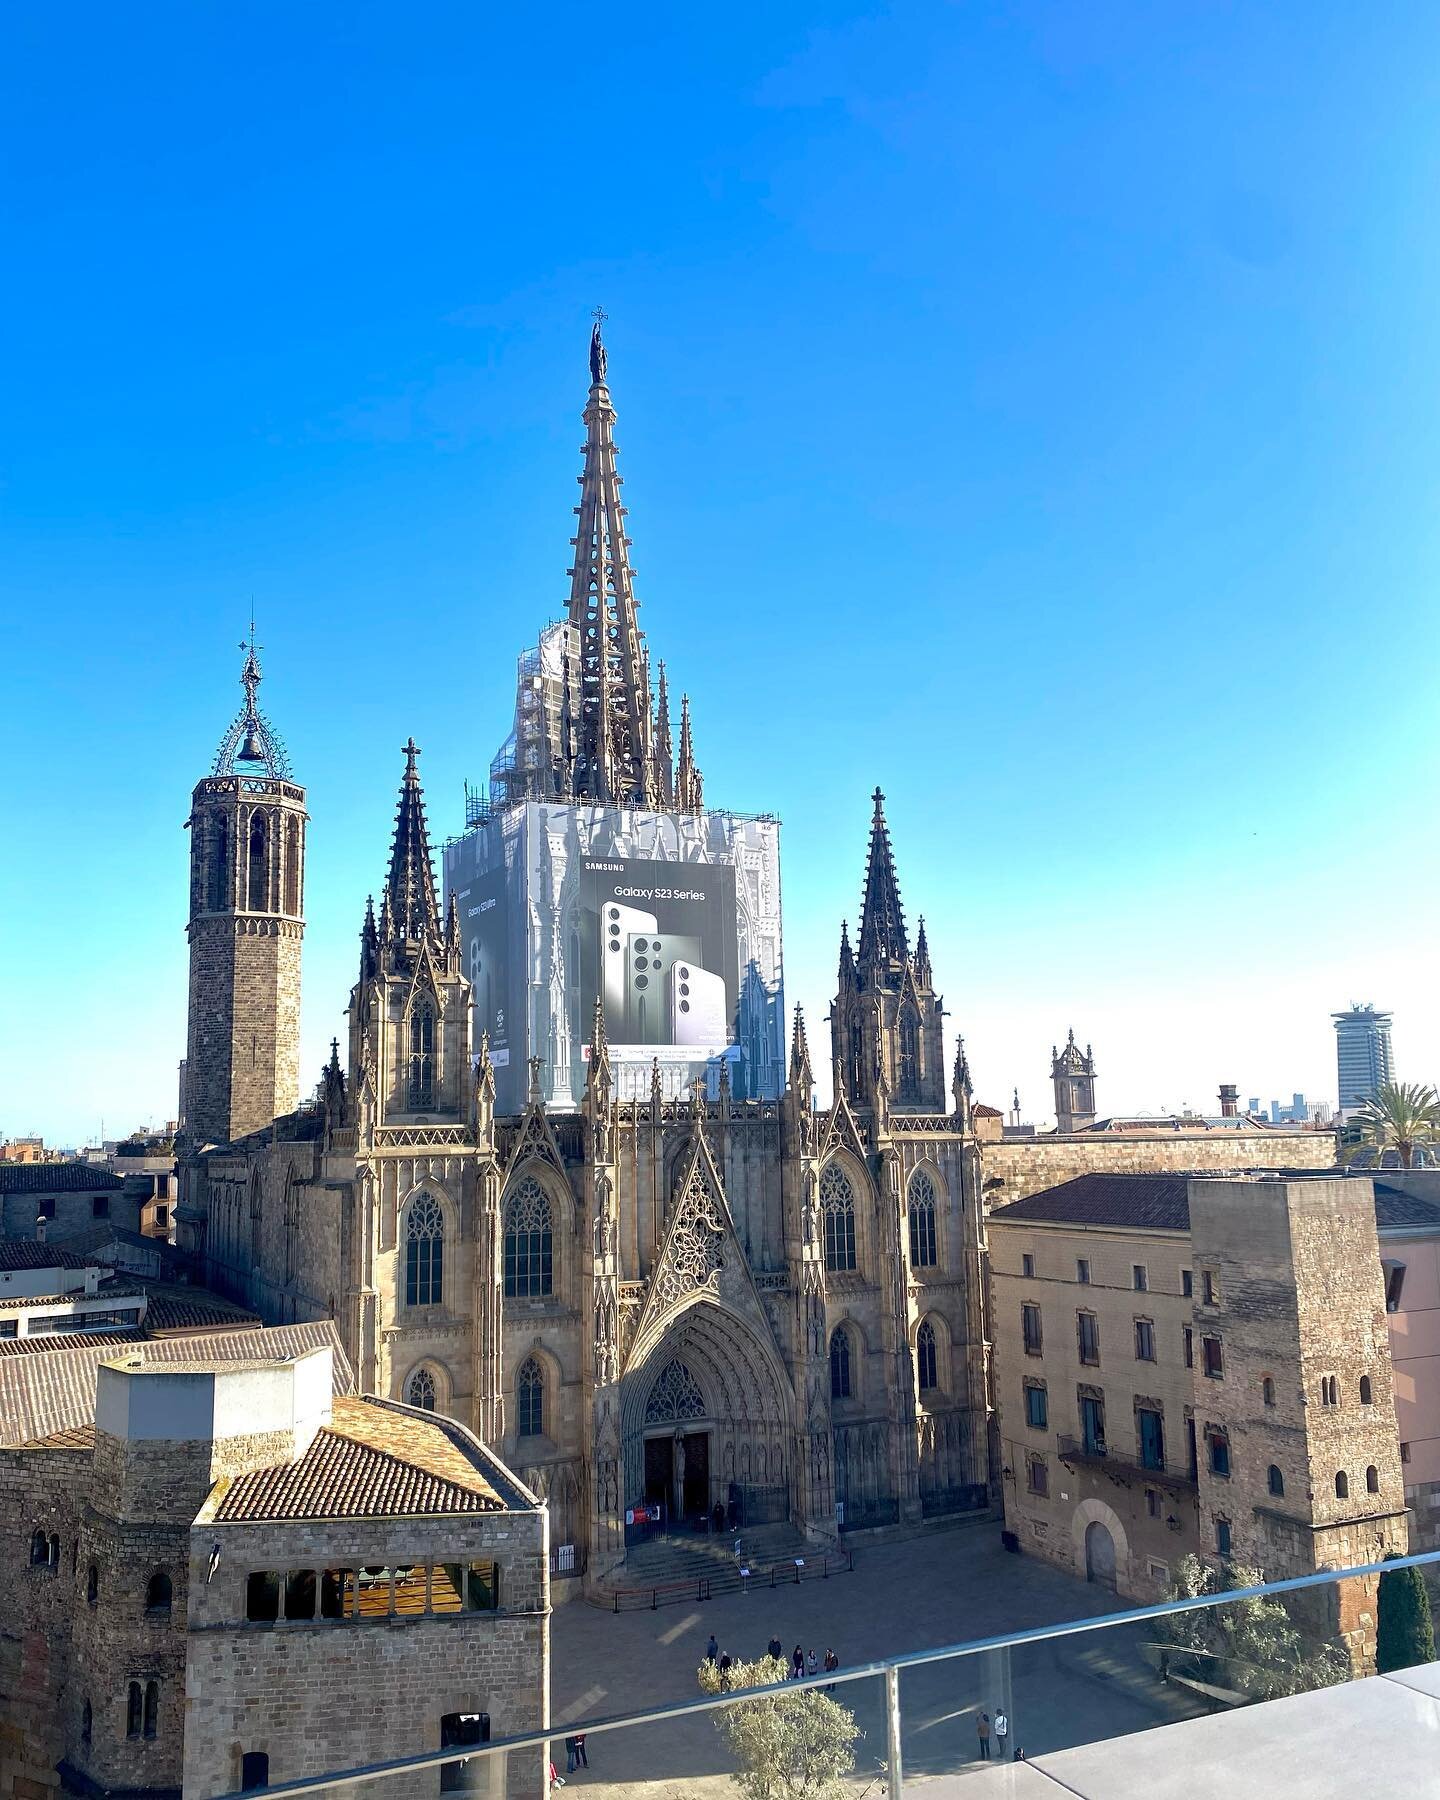 🚲GREENBIKES TIP🚲

The rooftop bar at hotel Colon is the perfect place to enjoy the sun!☀️

On the rooftop bar you have a view over the square around it, and the beautiful cathedral!🕍

#greenbikesbarcelona #barcelona #hotelcolon #cathedralbarcelona